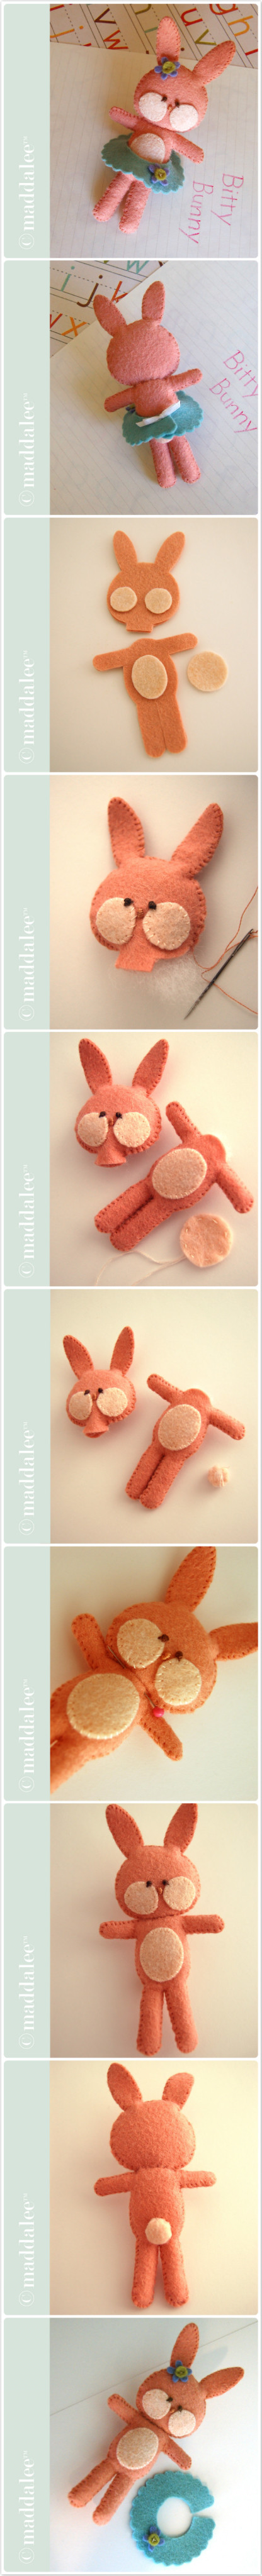 Bitty Bunny, Free Felt Bunny Pattern and Tutorial | From Maddalee